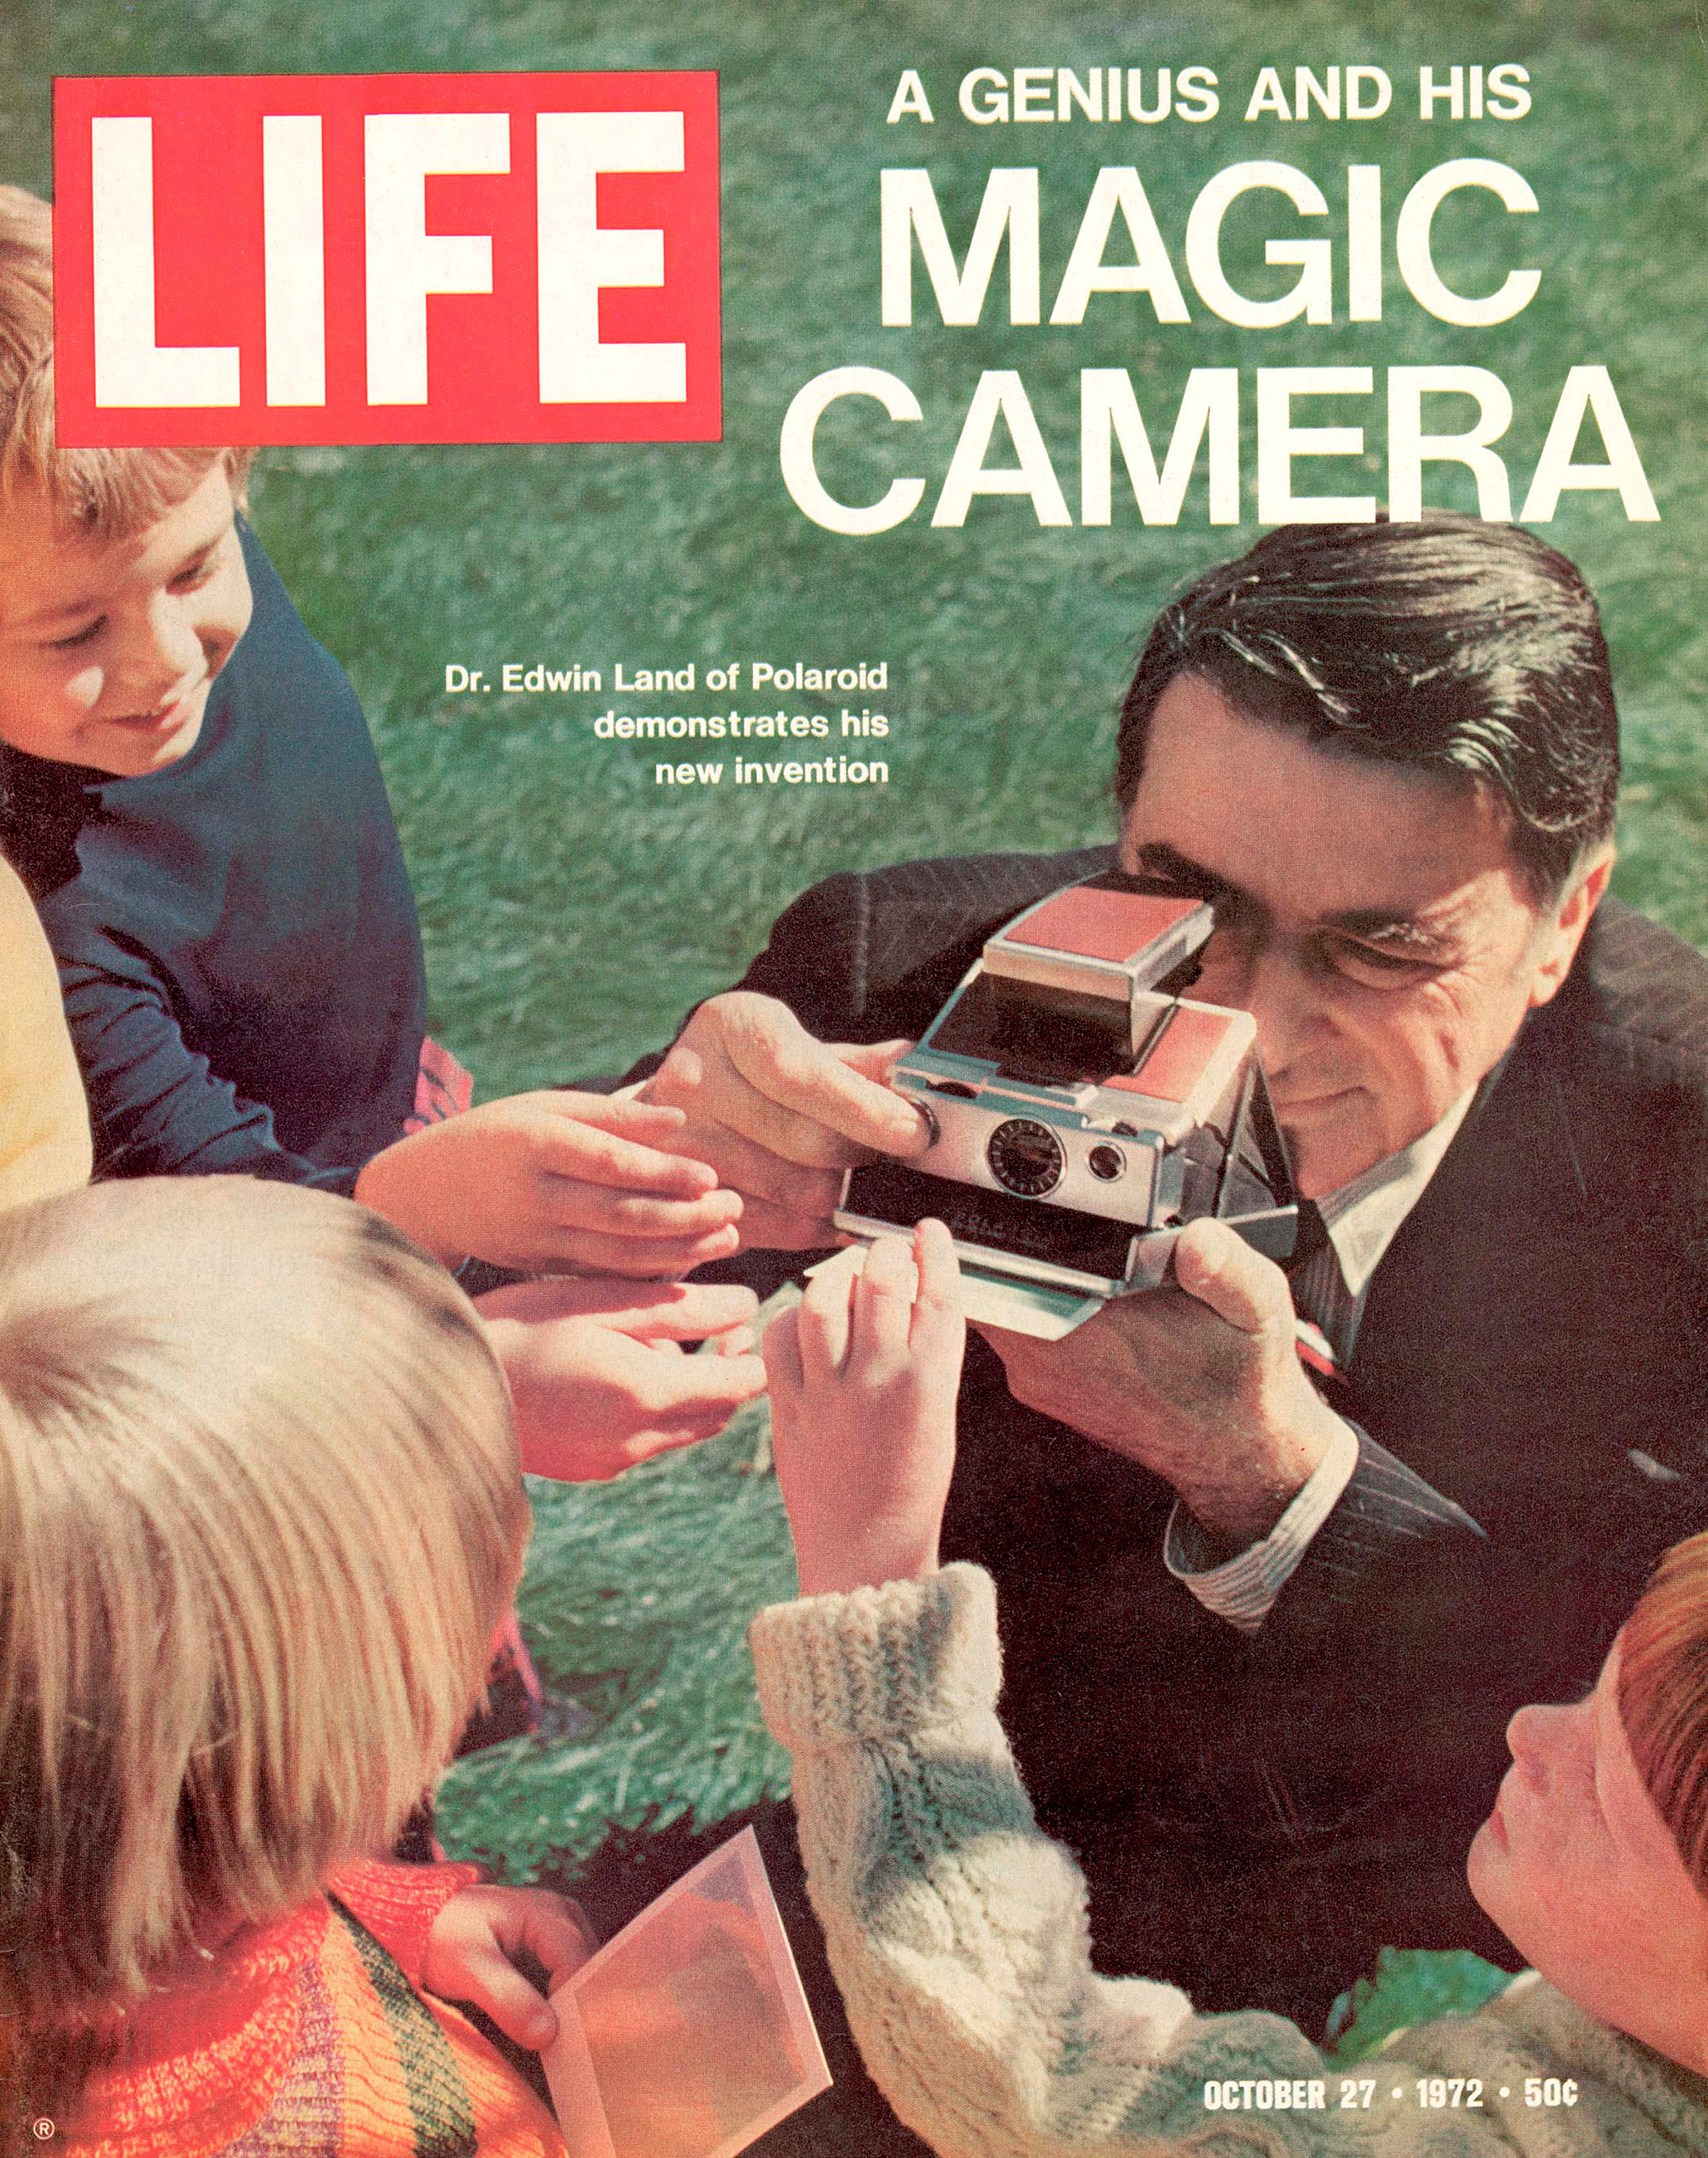 Edwin Land of Polaroid on the cover of LIFE magazine, October 27, 1972.